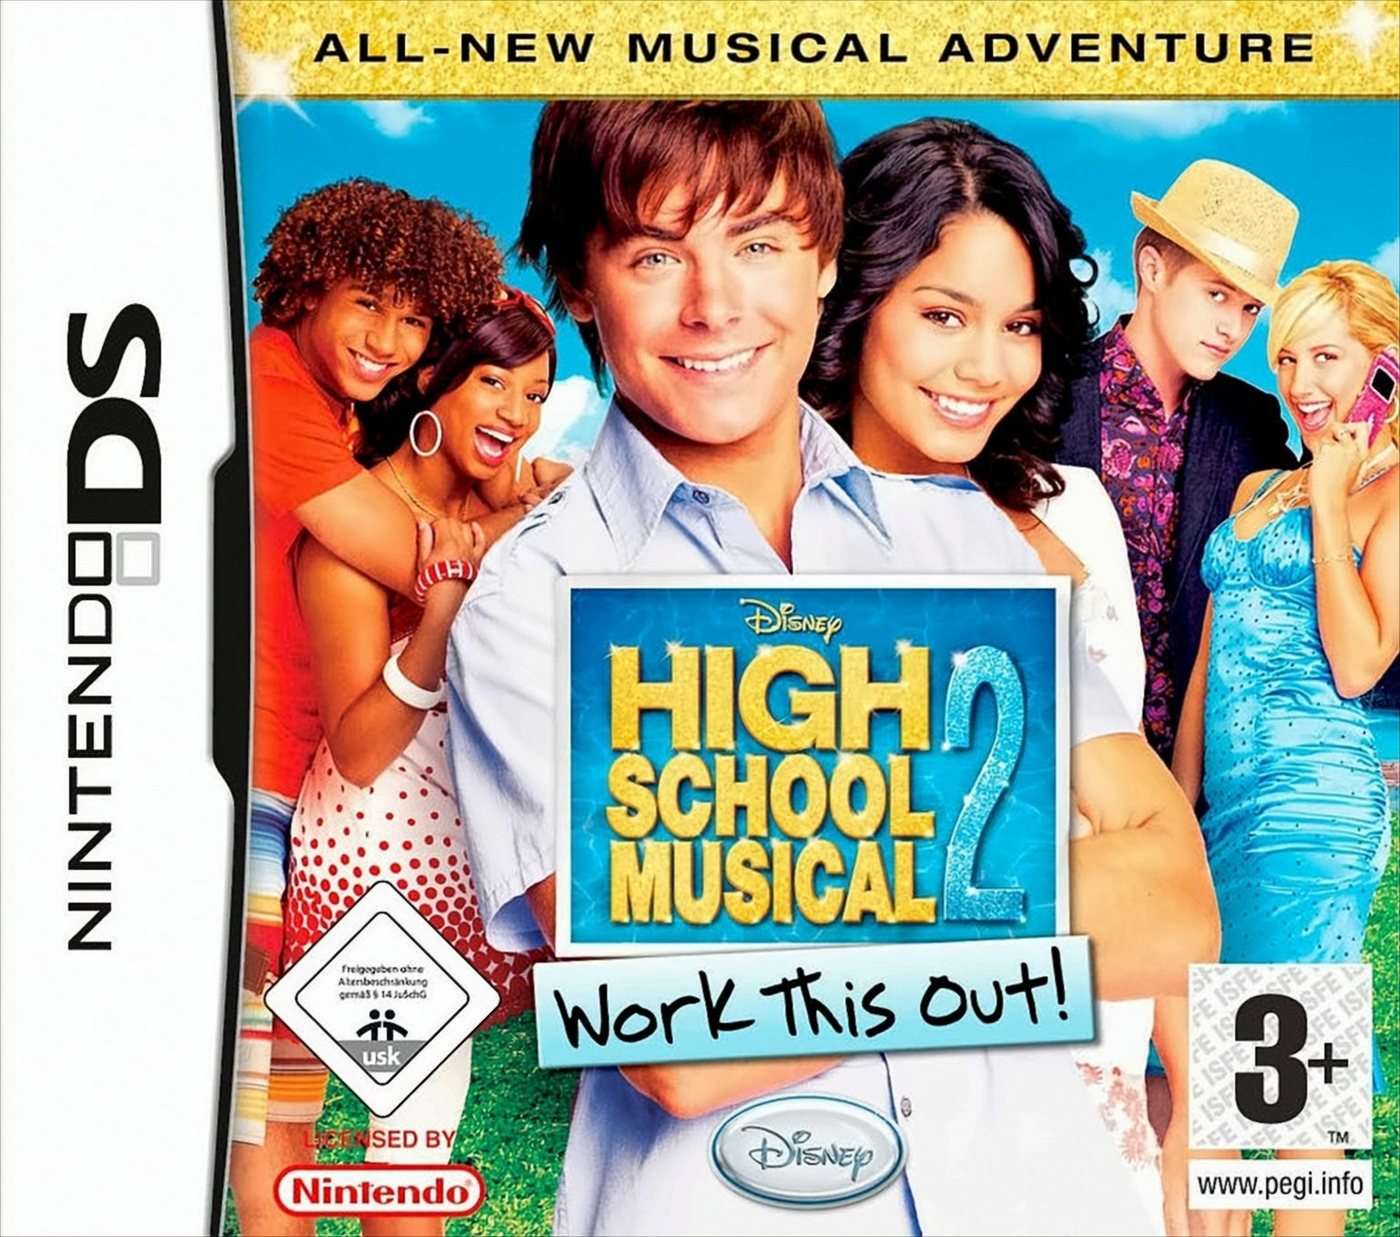 High School Musical 2: Work This Out! Nintendo DS von ak tronic